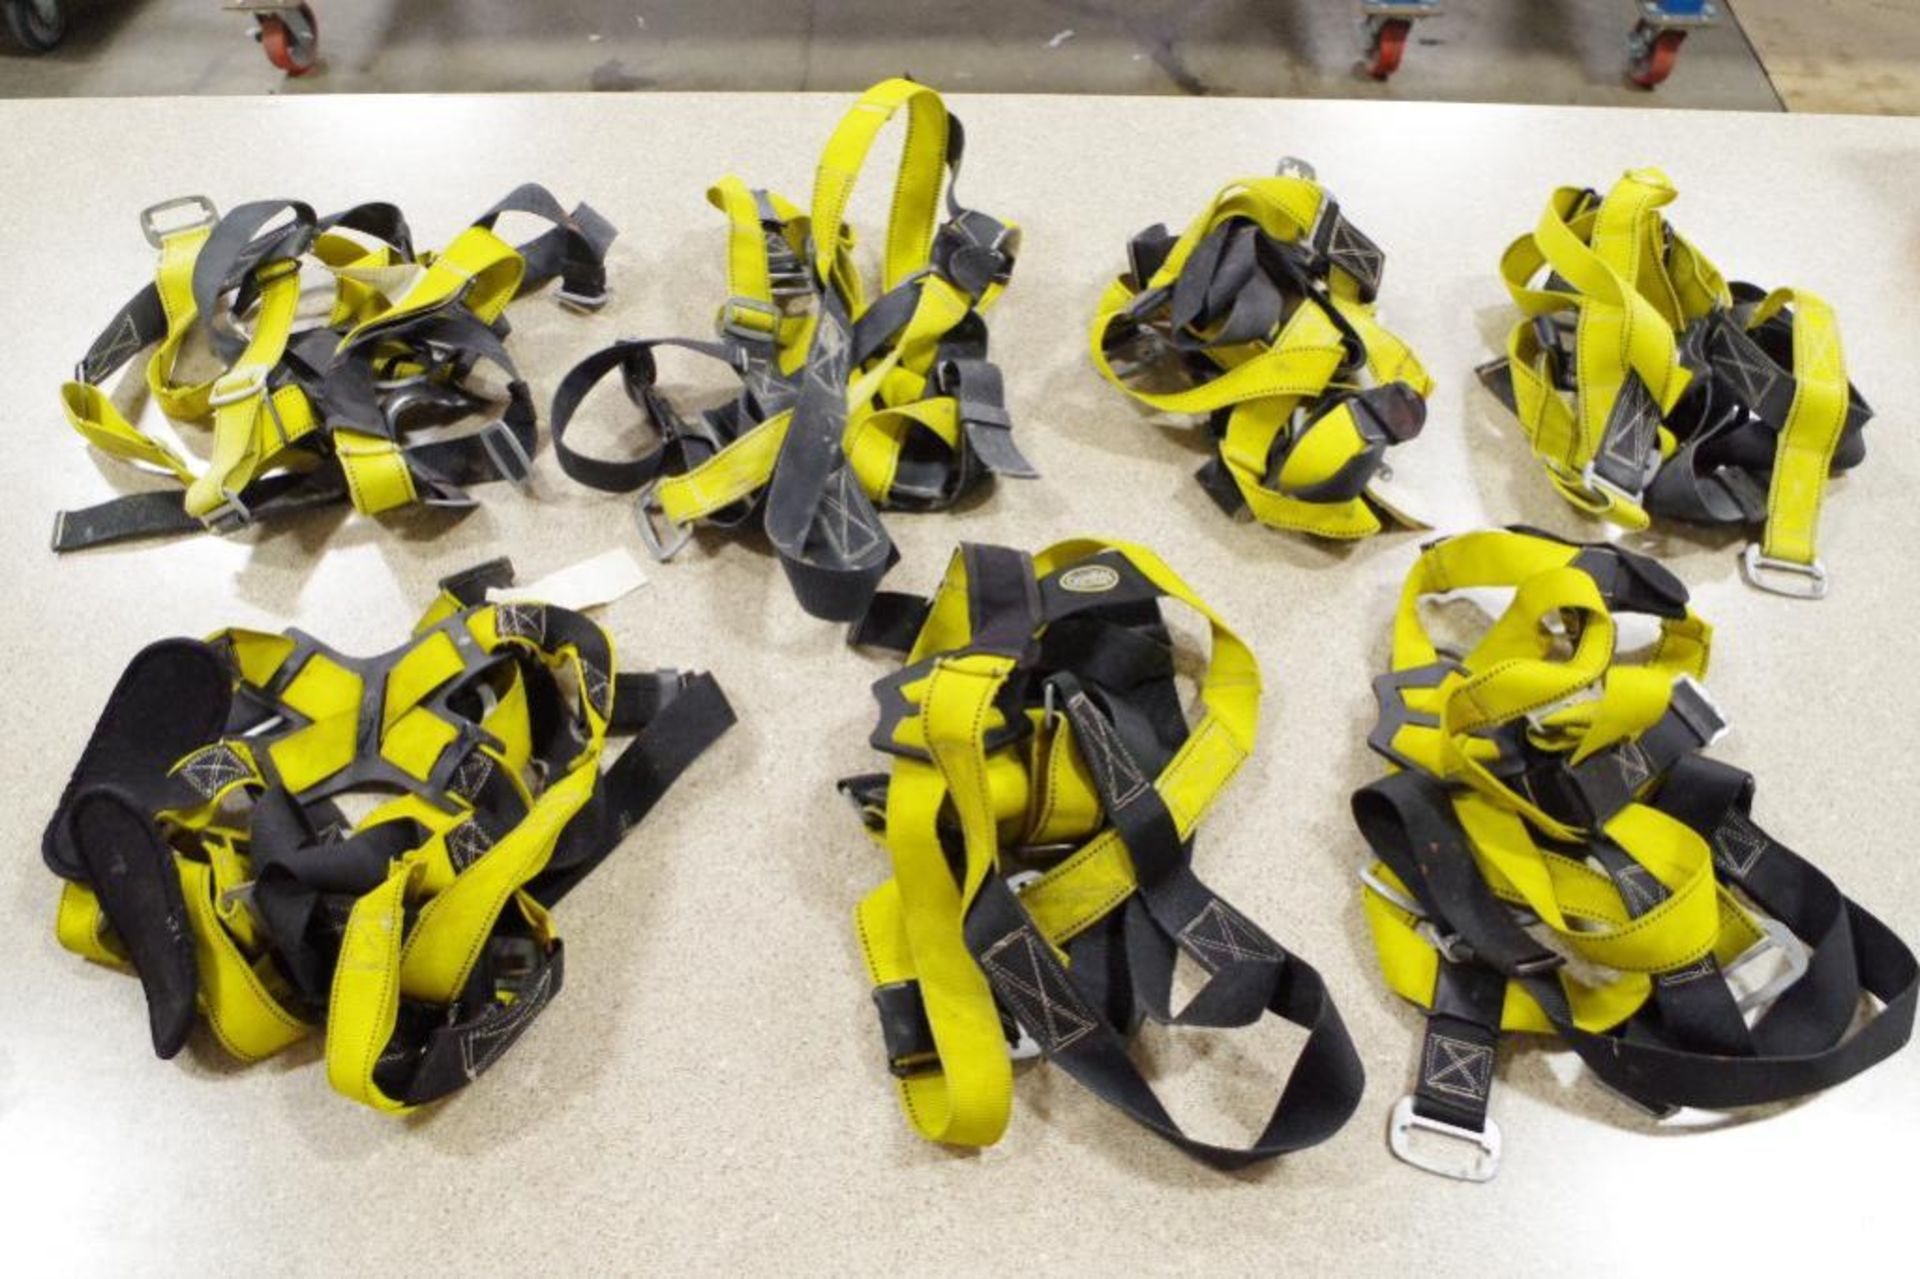 (7) GUARDIAN Fall Protection Harness's